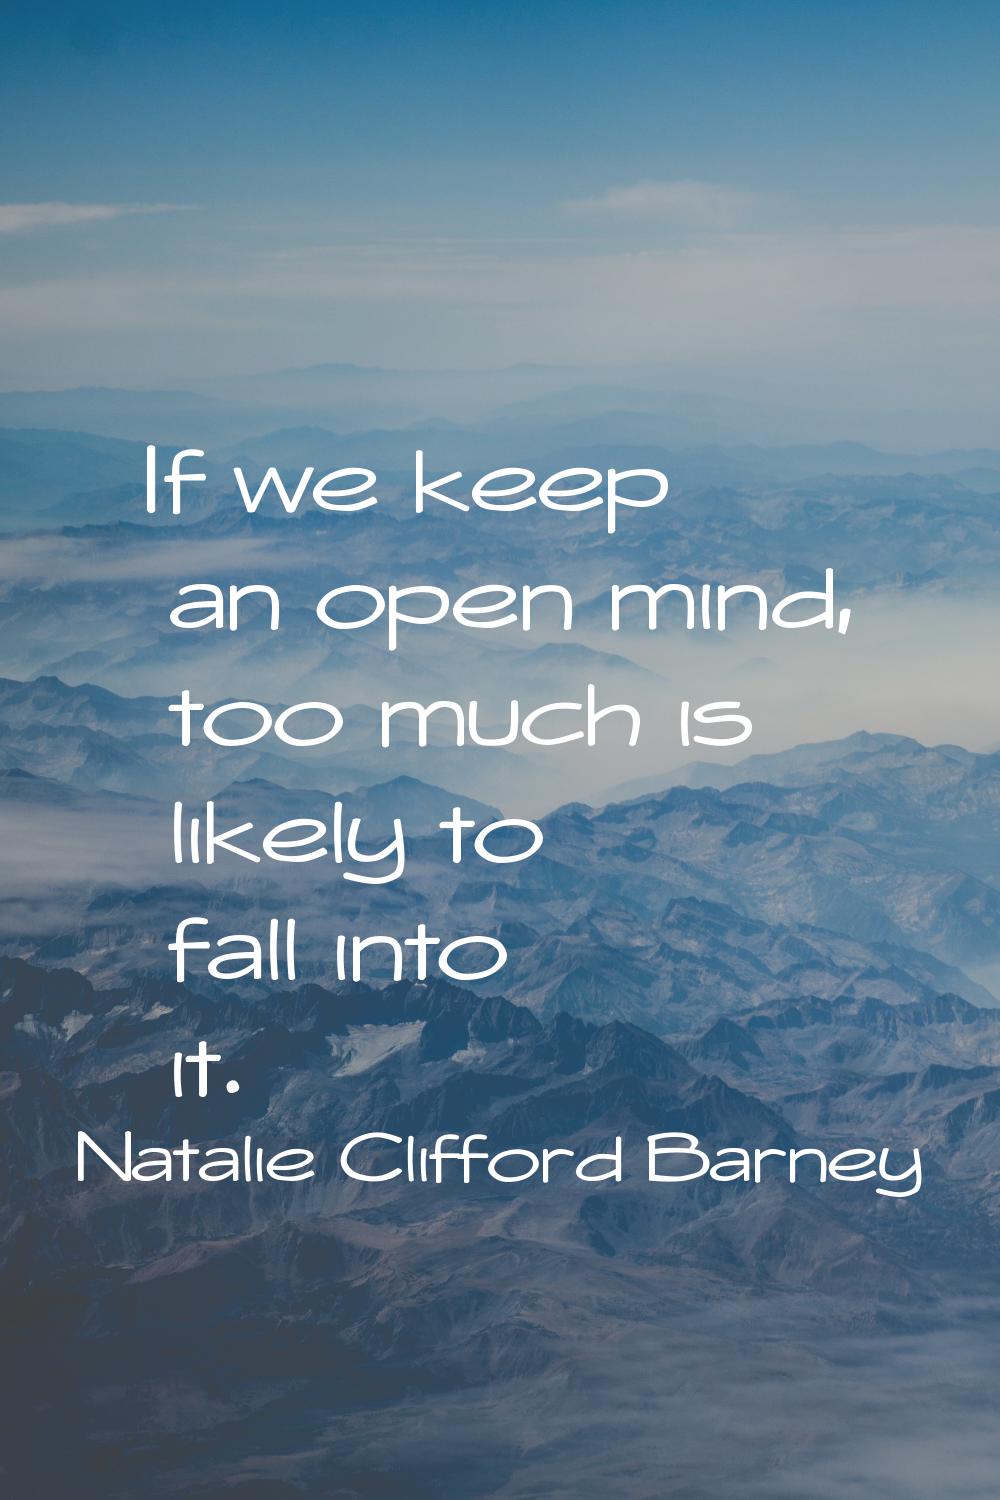 If we keep an open mind, too much is likely to fall into it.